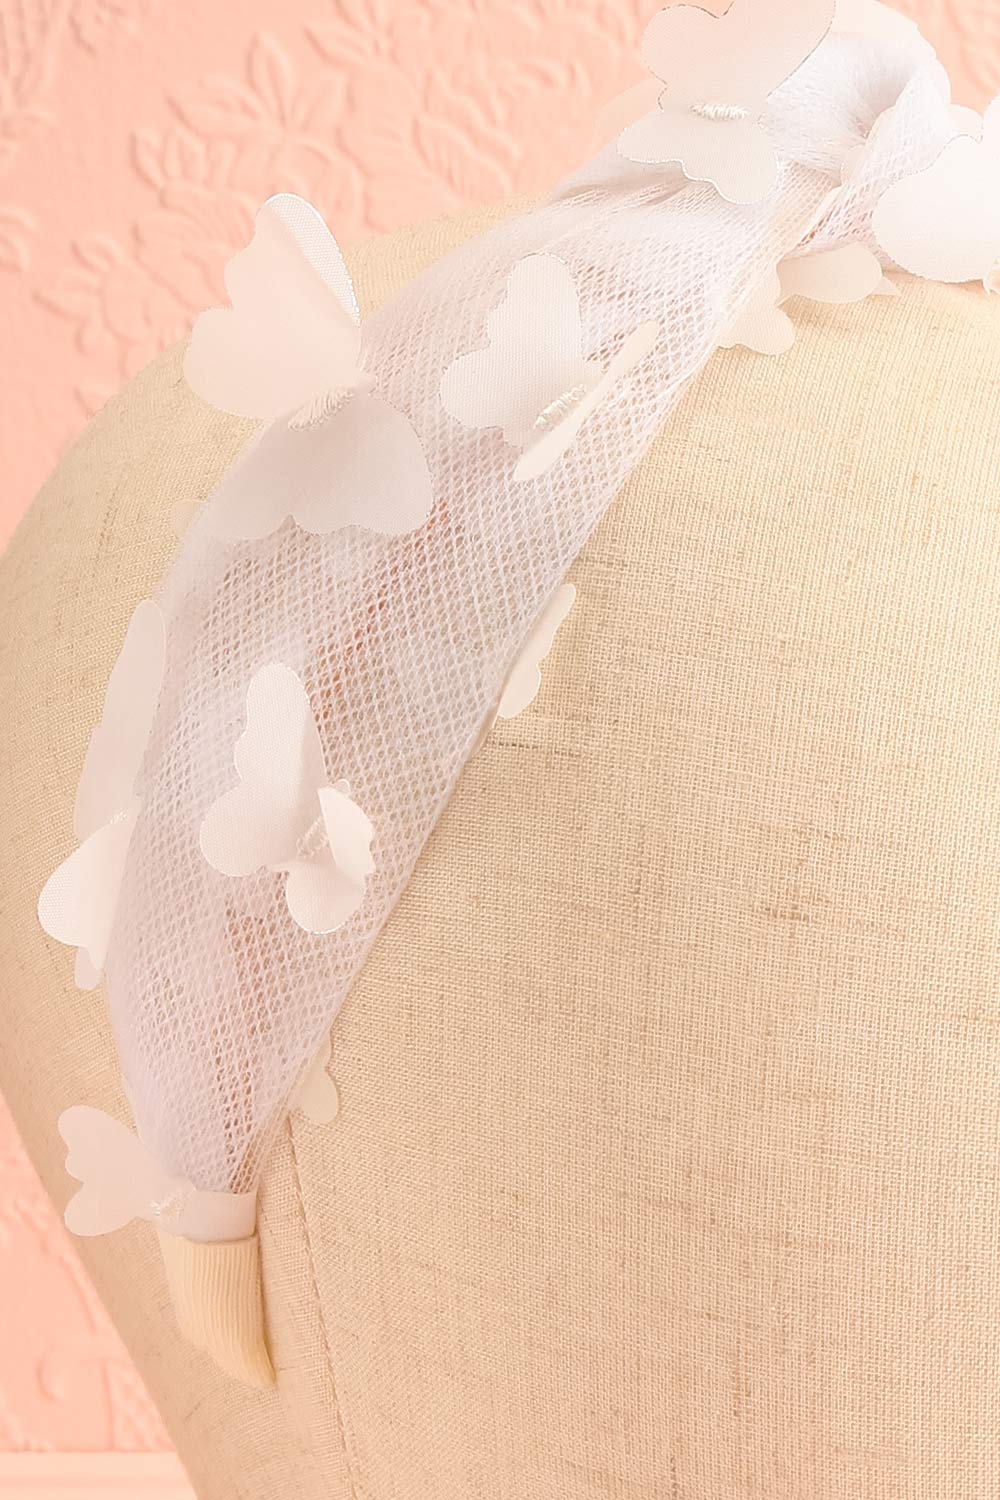 Bouterfla White Tulle Knotted Headband w/ Butterflies | Boutique 1861 front close-up